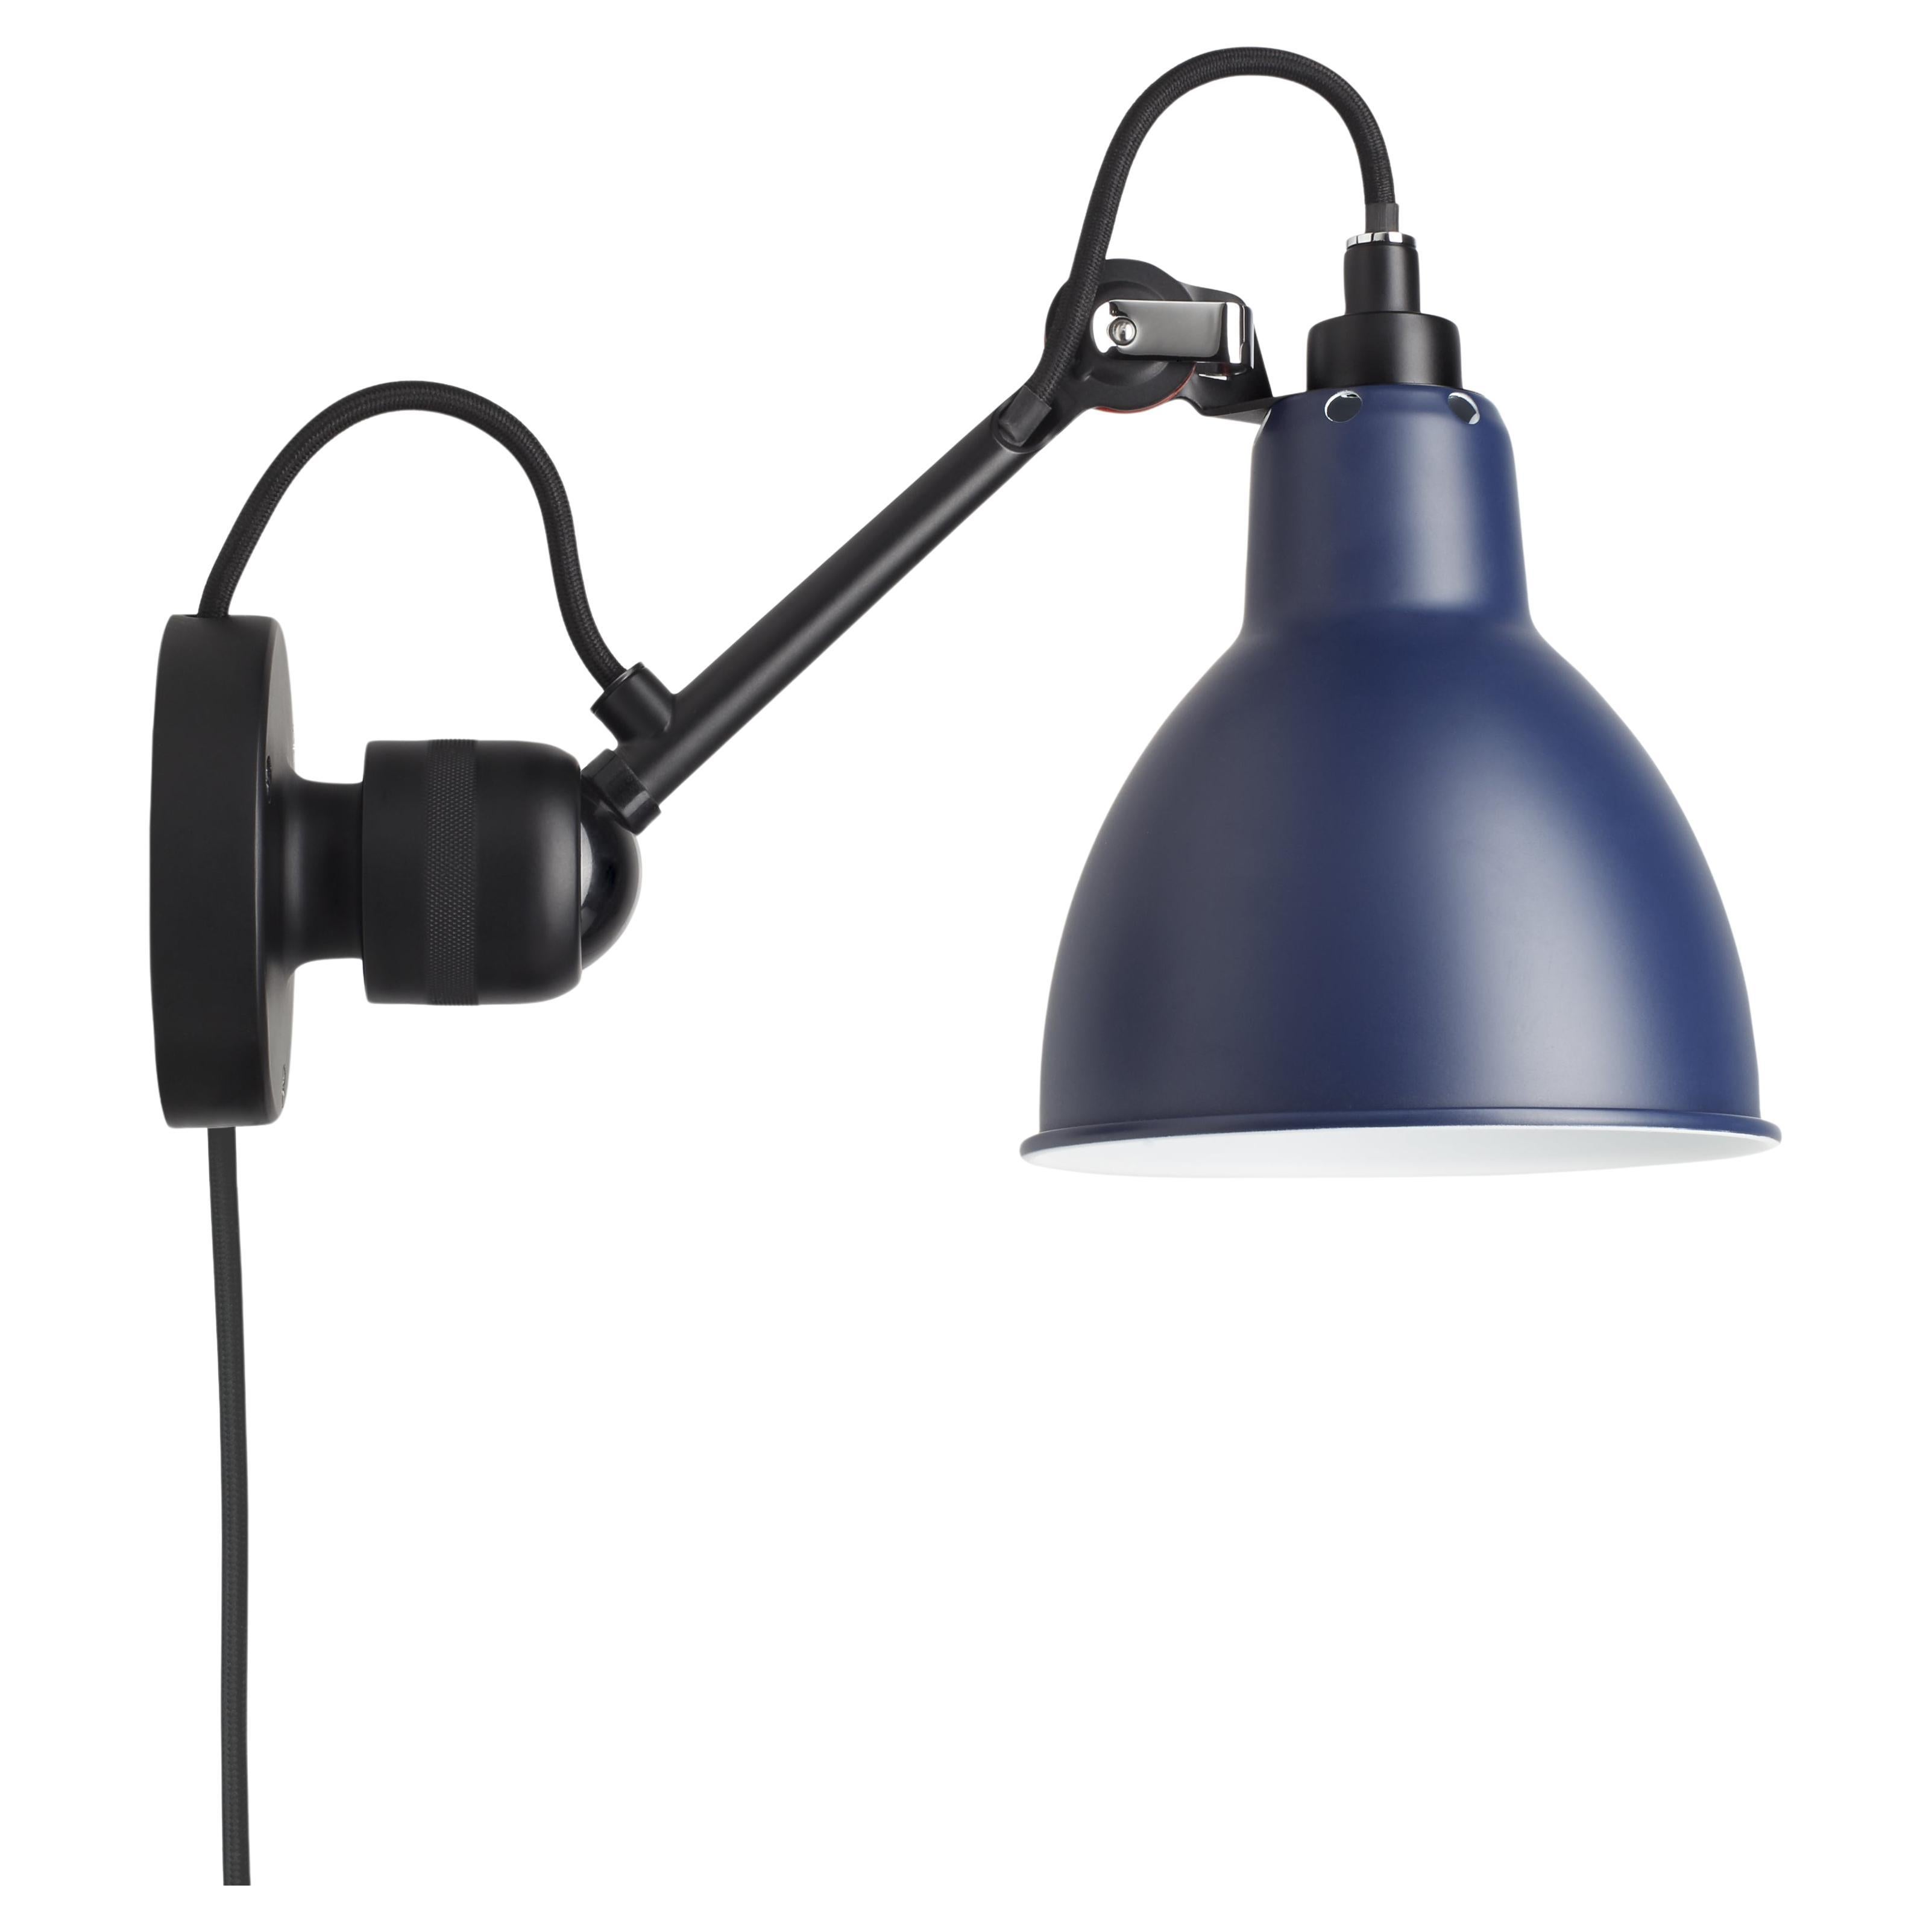 DCW Editions La Lampe Gras N°304 CA Wall Lamp in Black Arm and Blue Shade